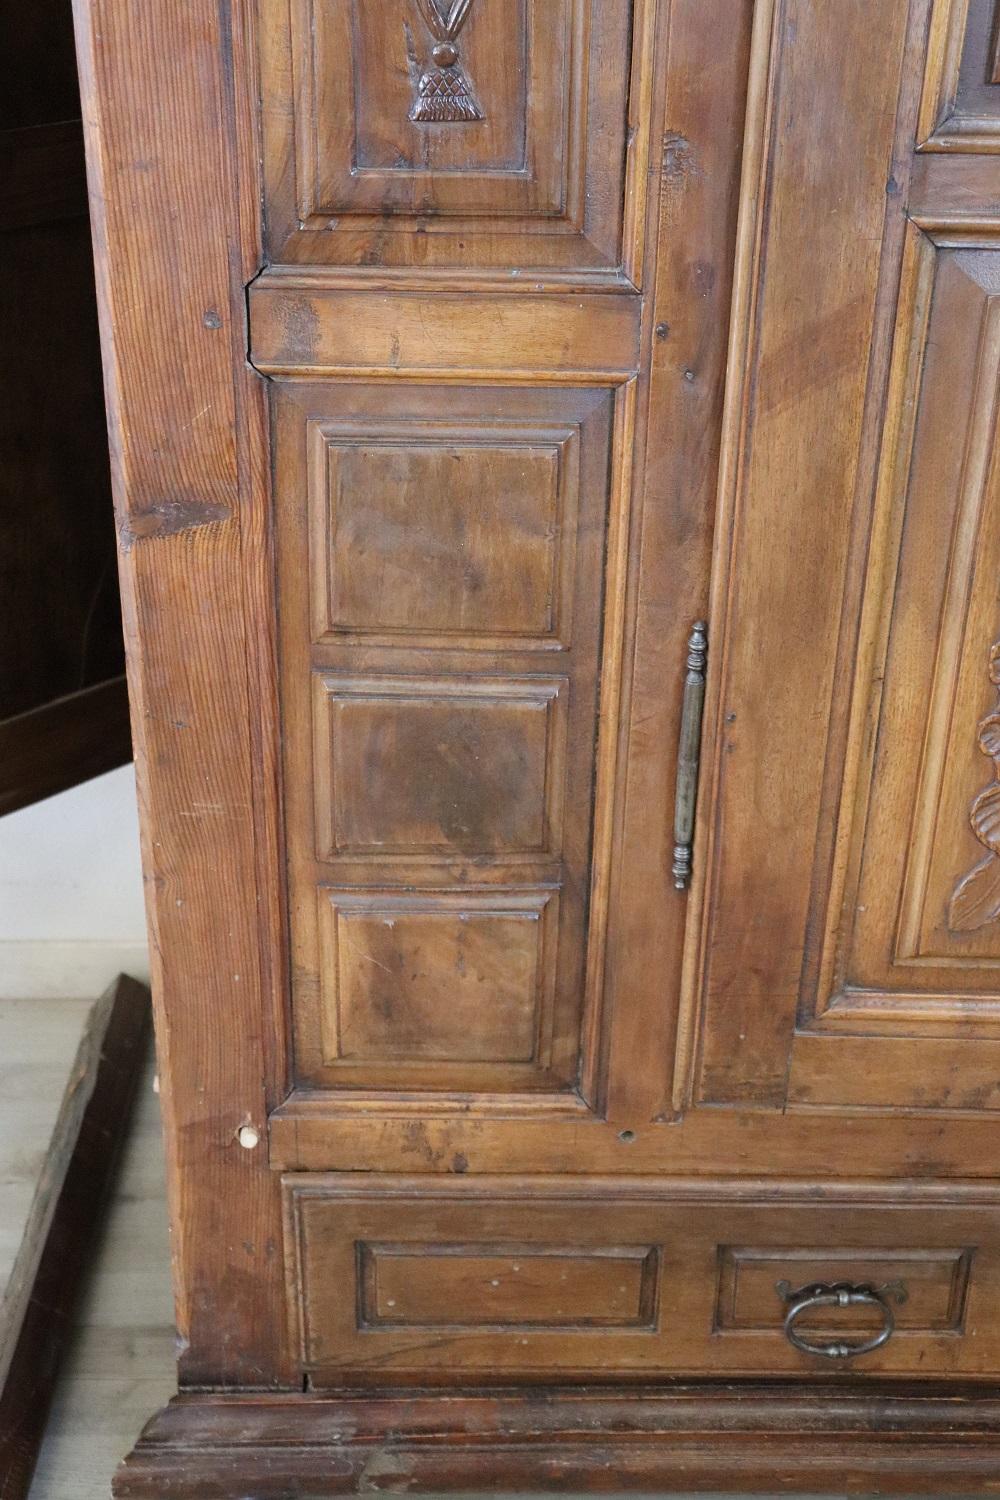 Early 18th Century Baroque Carved Walnut Antique Wardrobe, Cabinet with Secrets 2